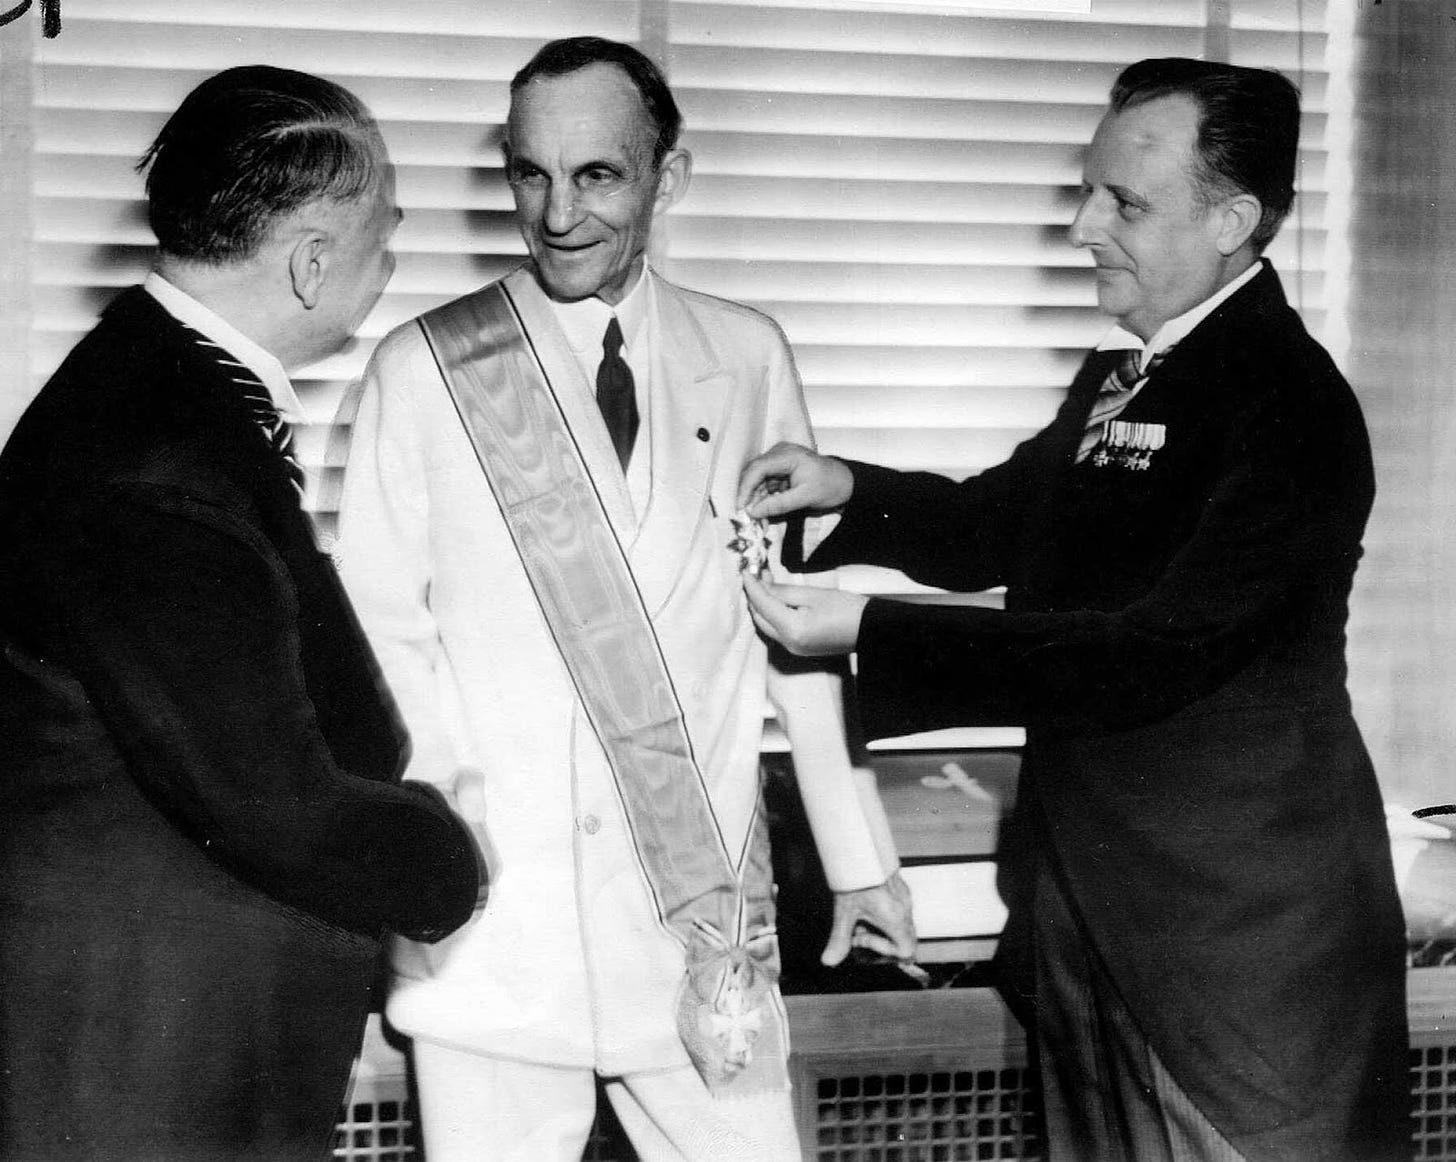 Henry Ford receiving the Grand Cross of the German Eagle from Nazi officials, 1938.